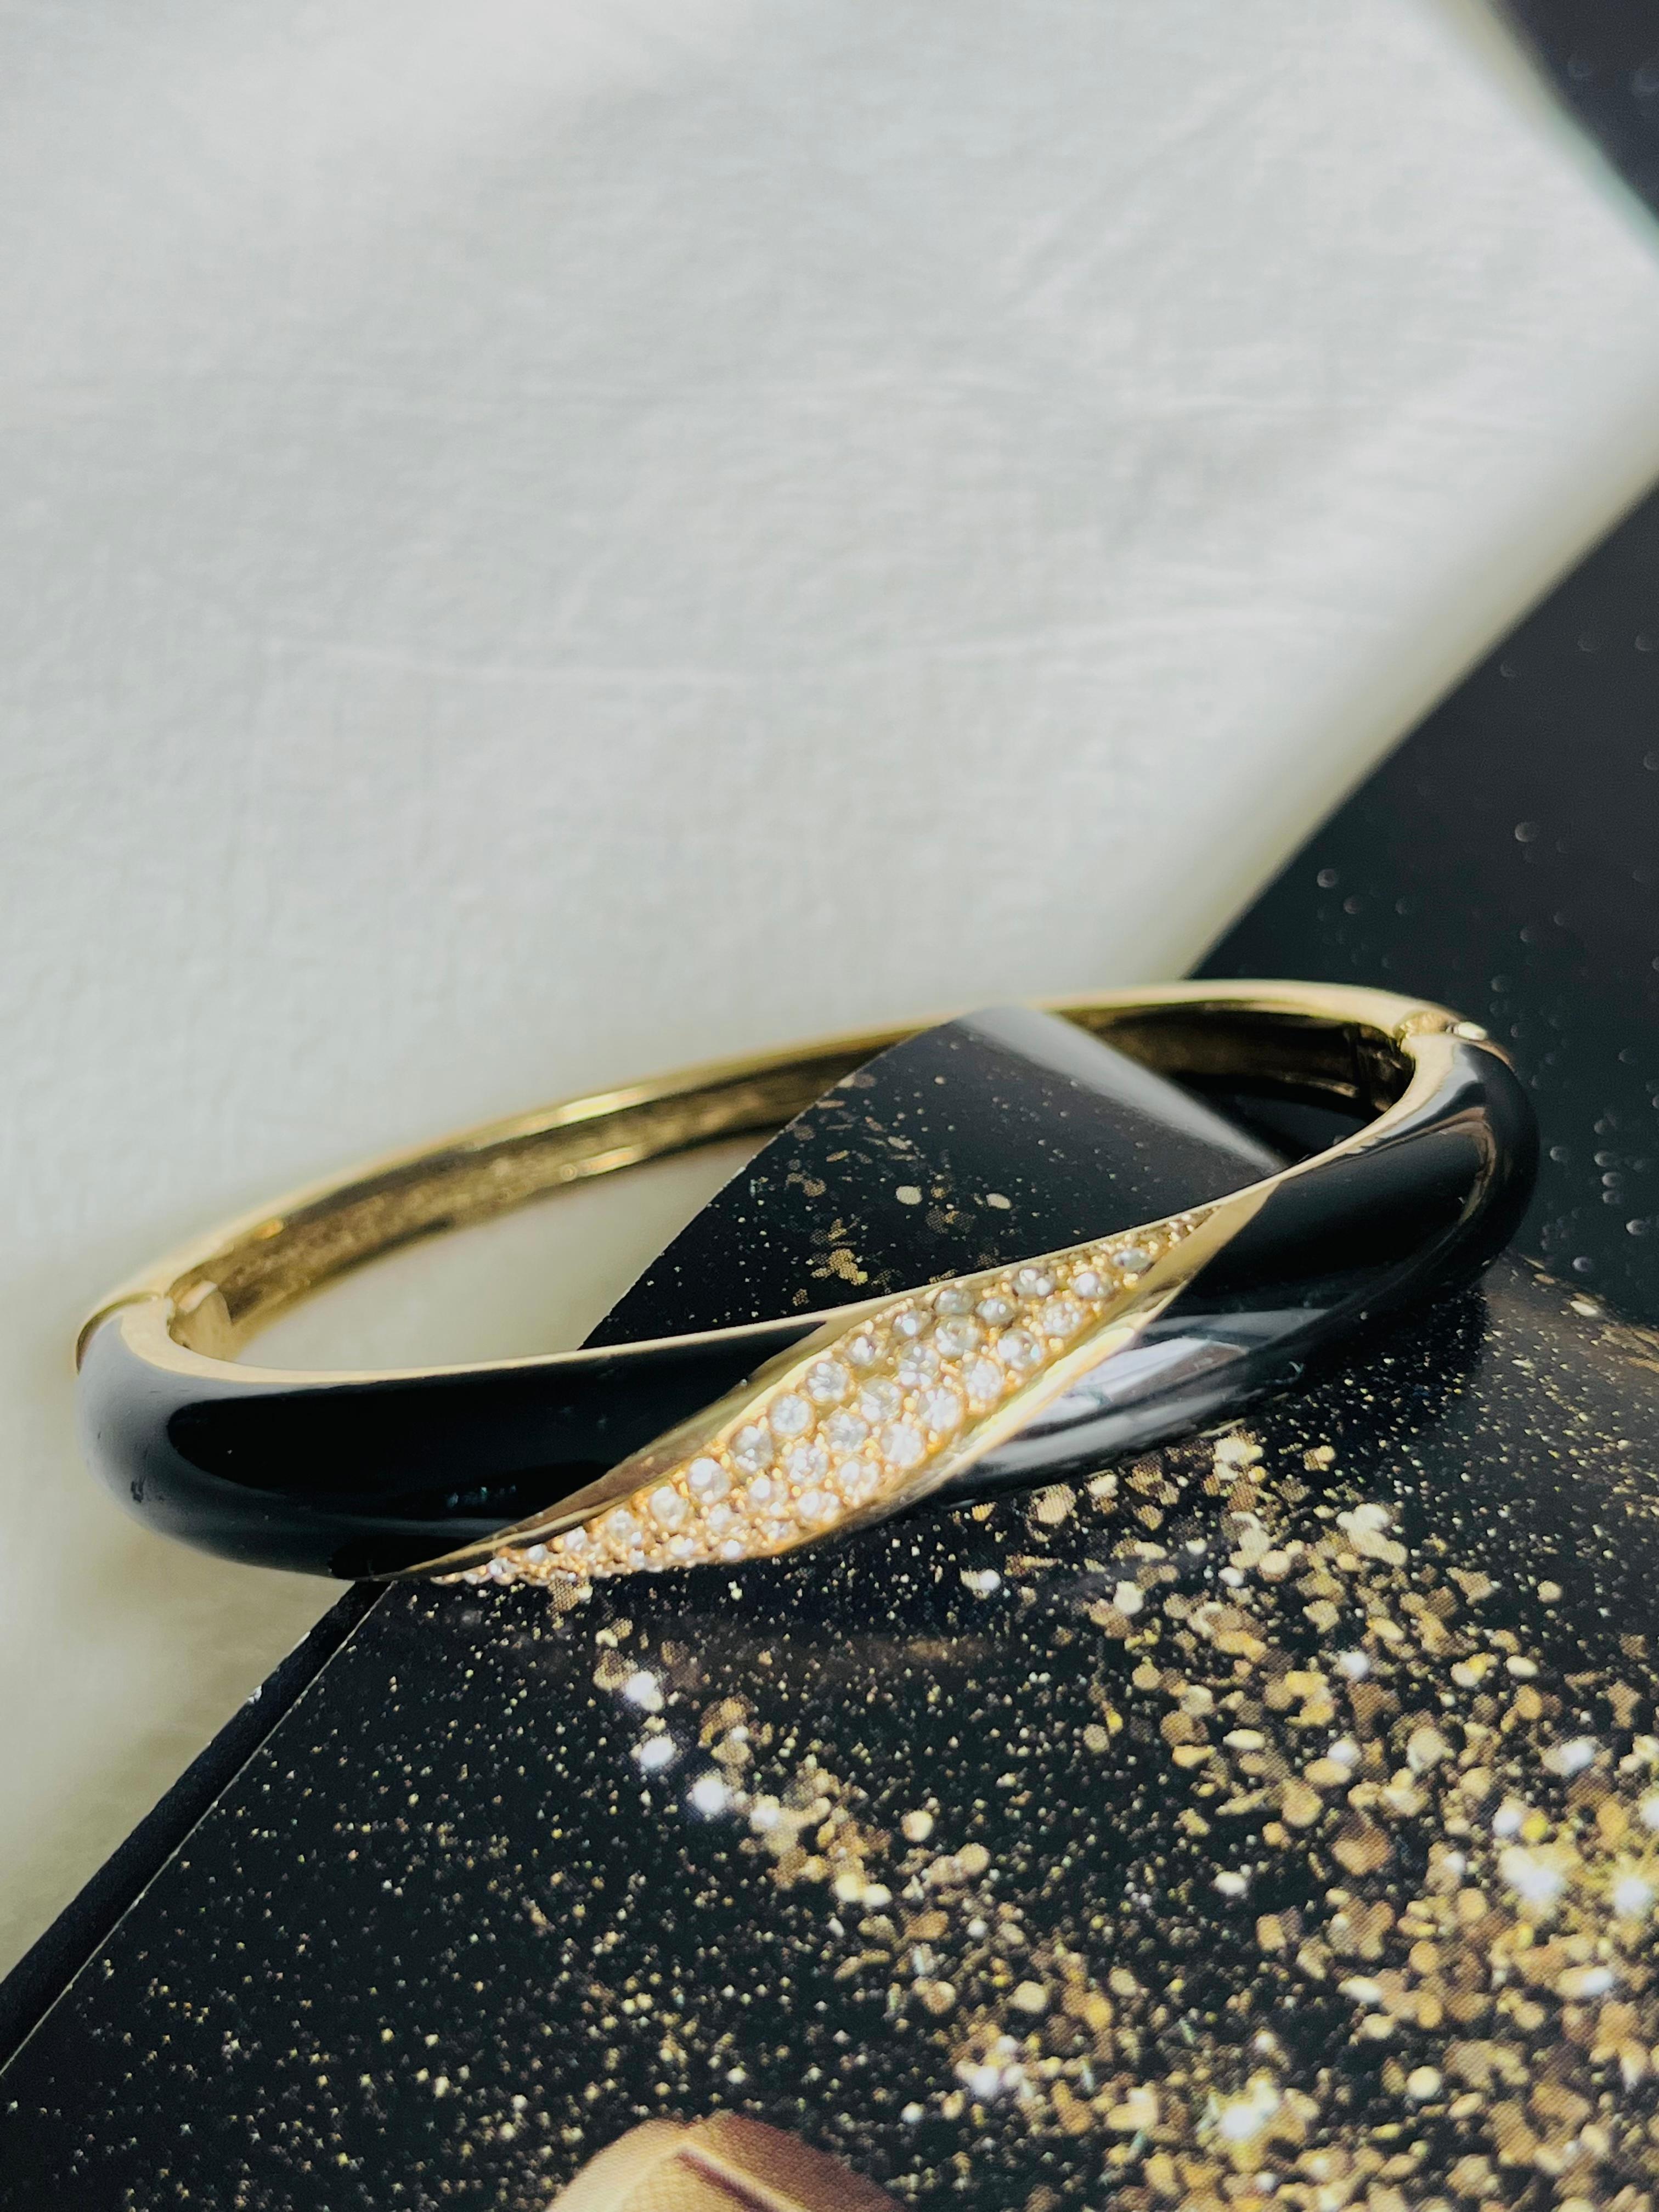 Christian Dior 1980s Vintage Black Enamel Spiral Crystals Cuff Bangle Bracelet, Gold Tone

A very beautiful bracelet by Chr. DIOR, signed at the back. Rare to find. 

Very good condition. 100% Genuine.

Size: diameter 6.5 cm. perimeter 20 cm. width: